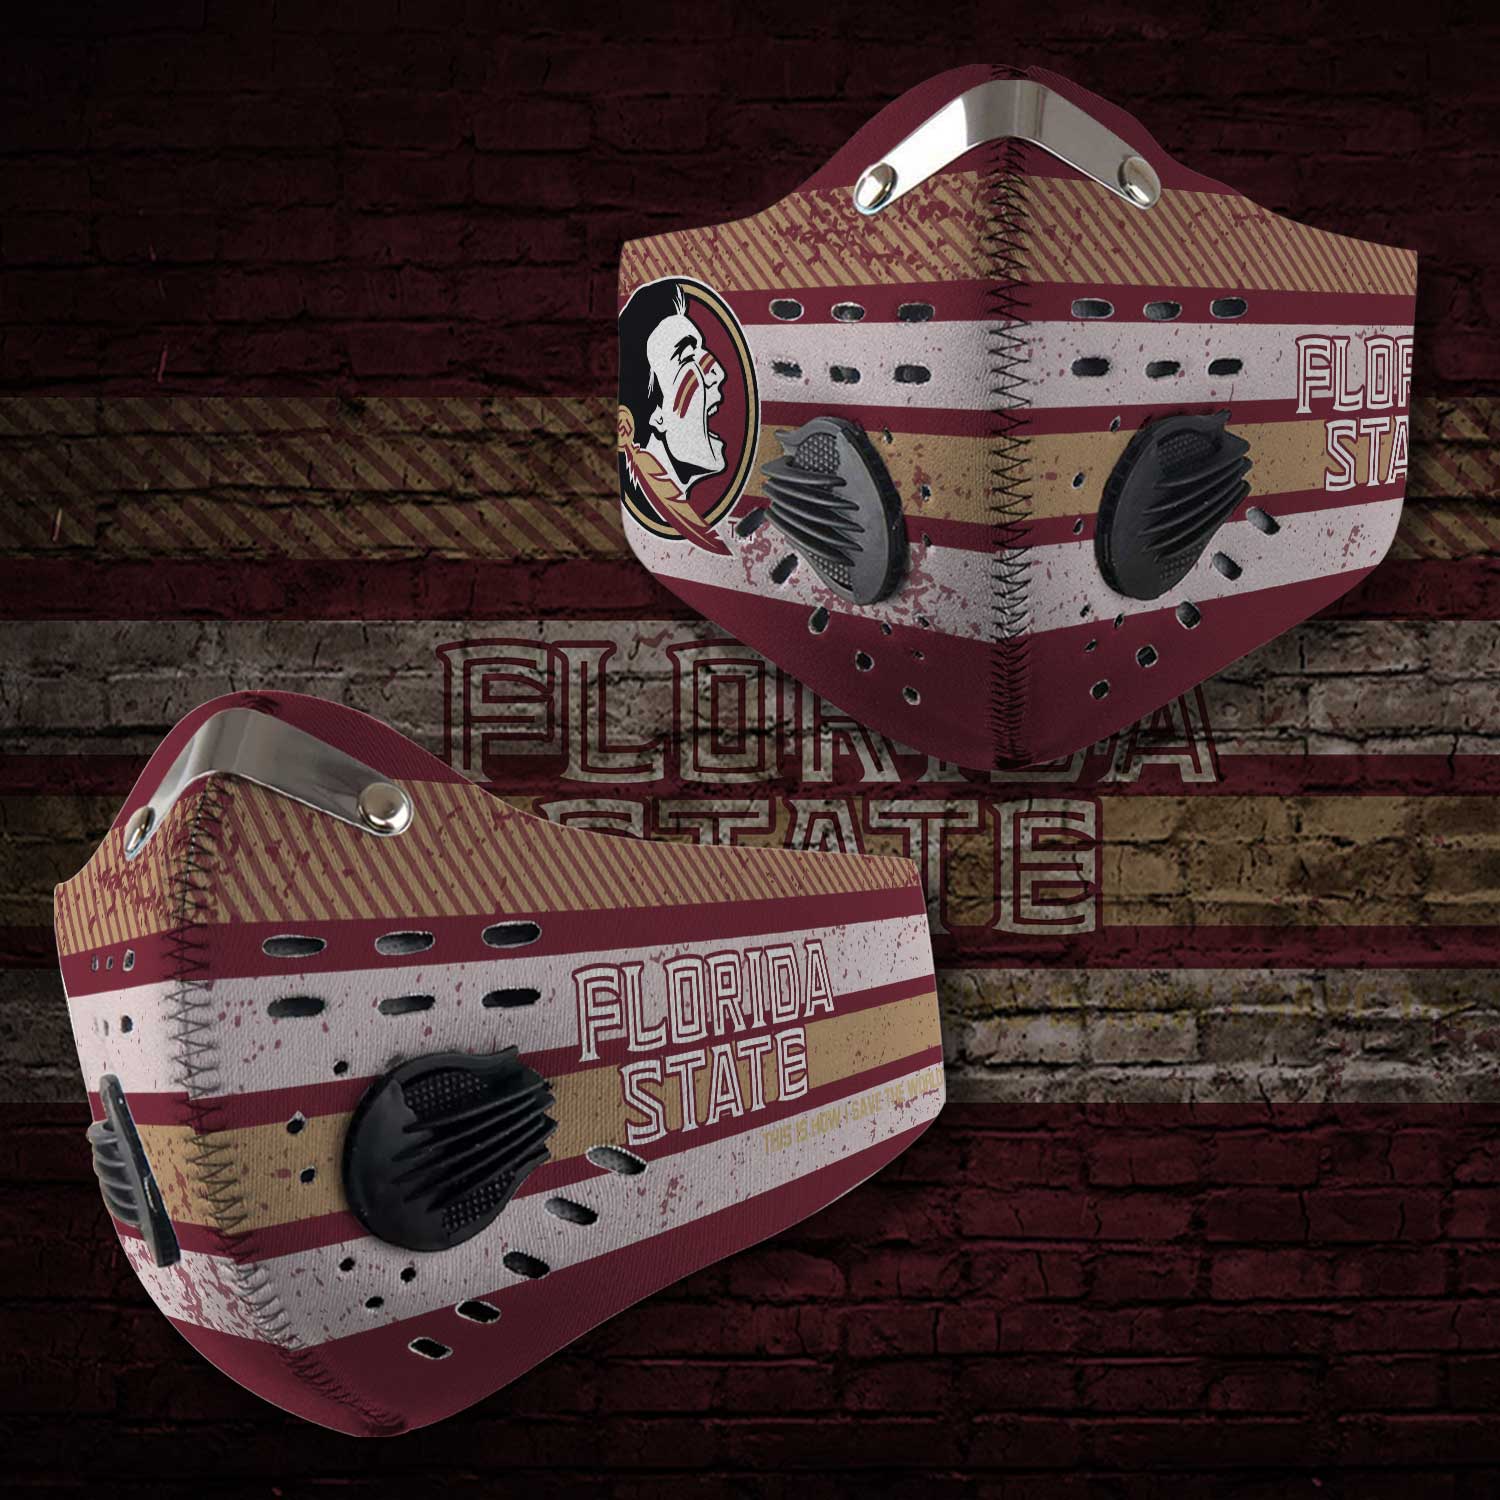 Florida state seminoles football this is how i save the world face mask